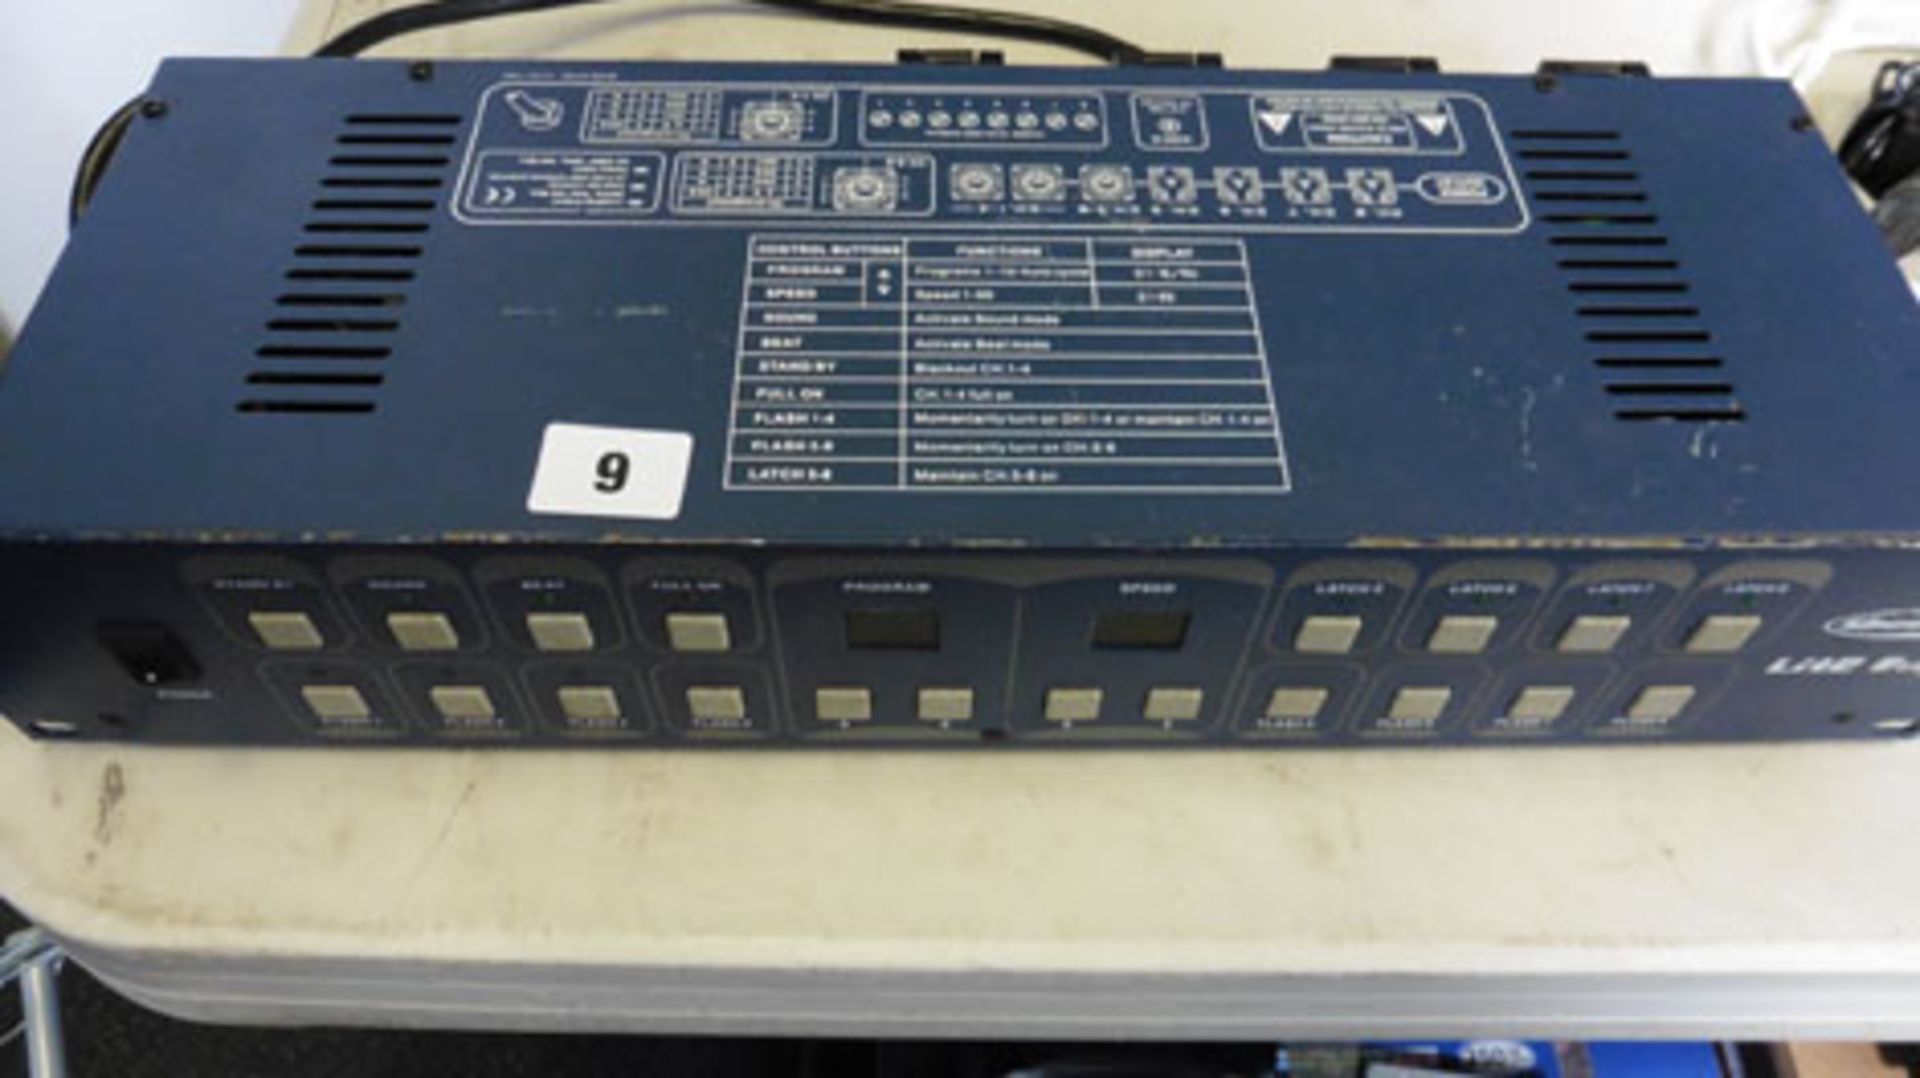 Showtek lite boss light controller box *VAT will not be added to the hammer price of this lot*